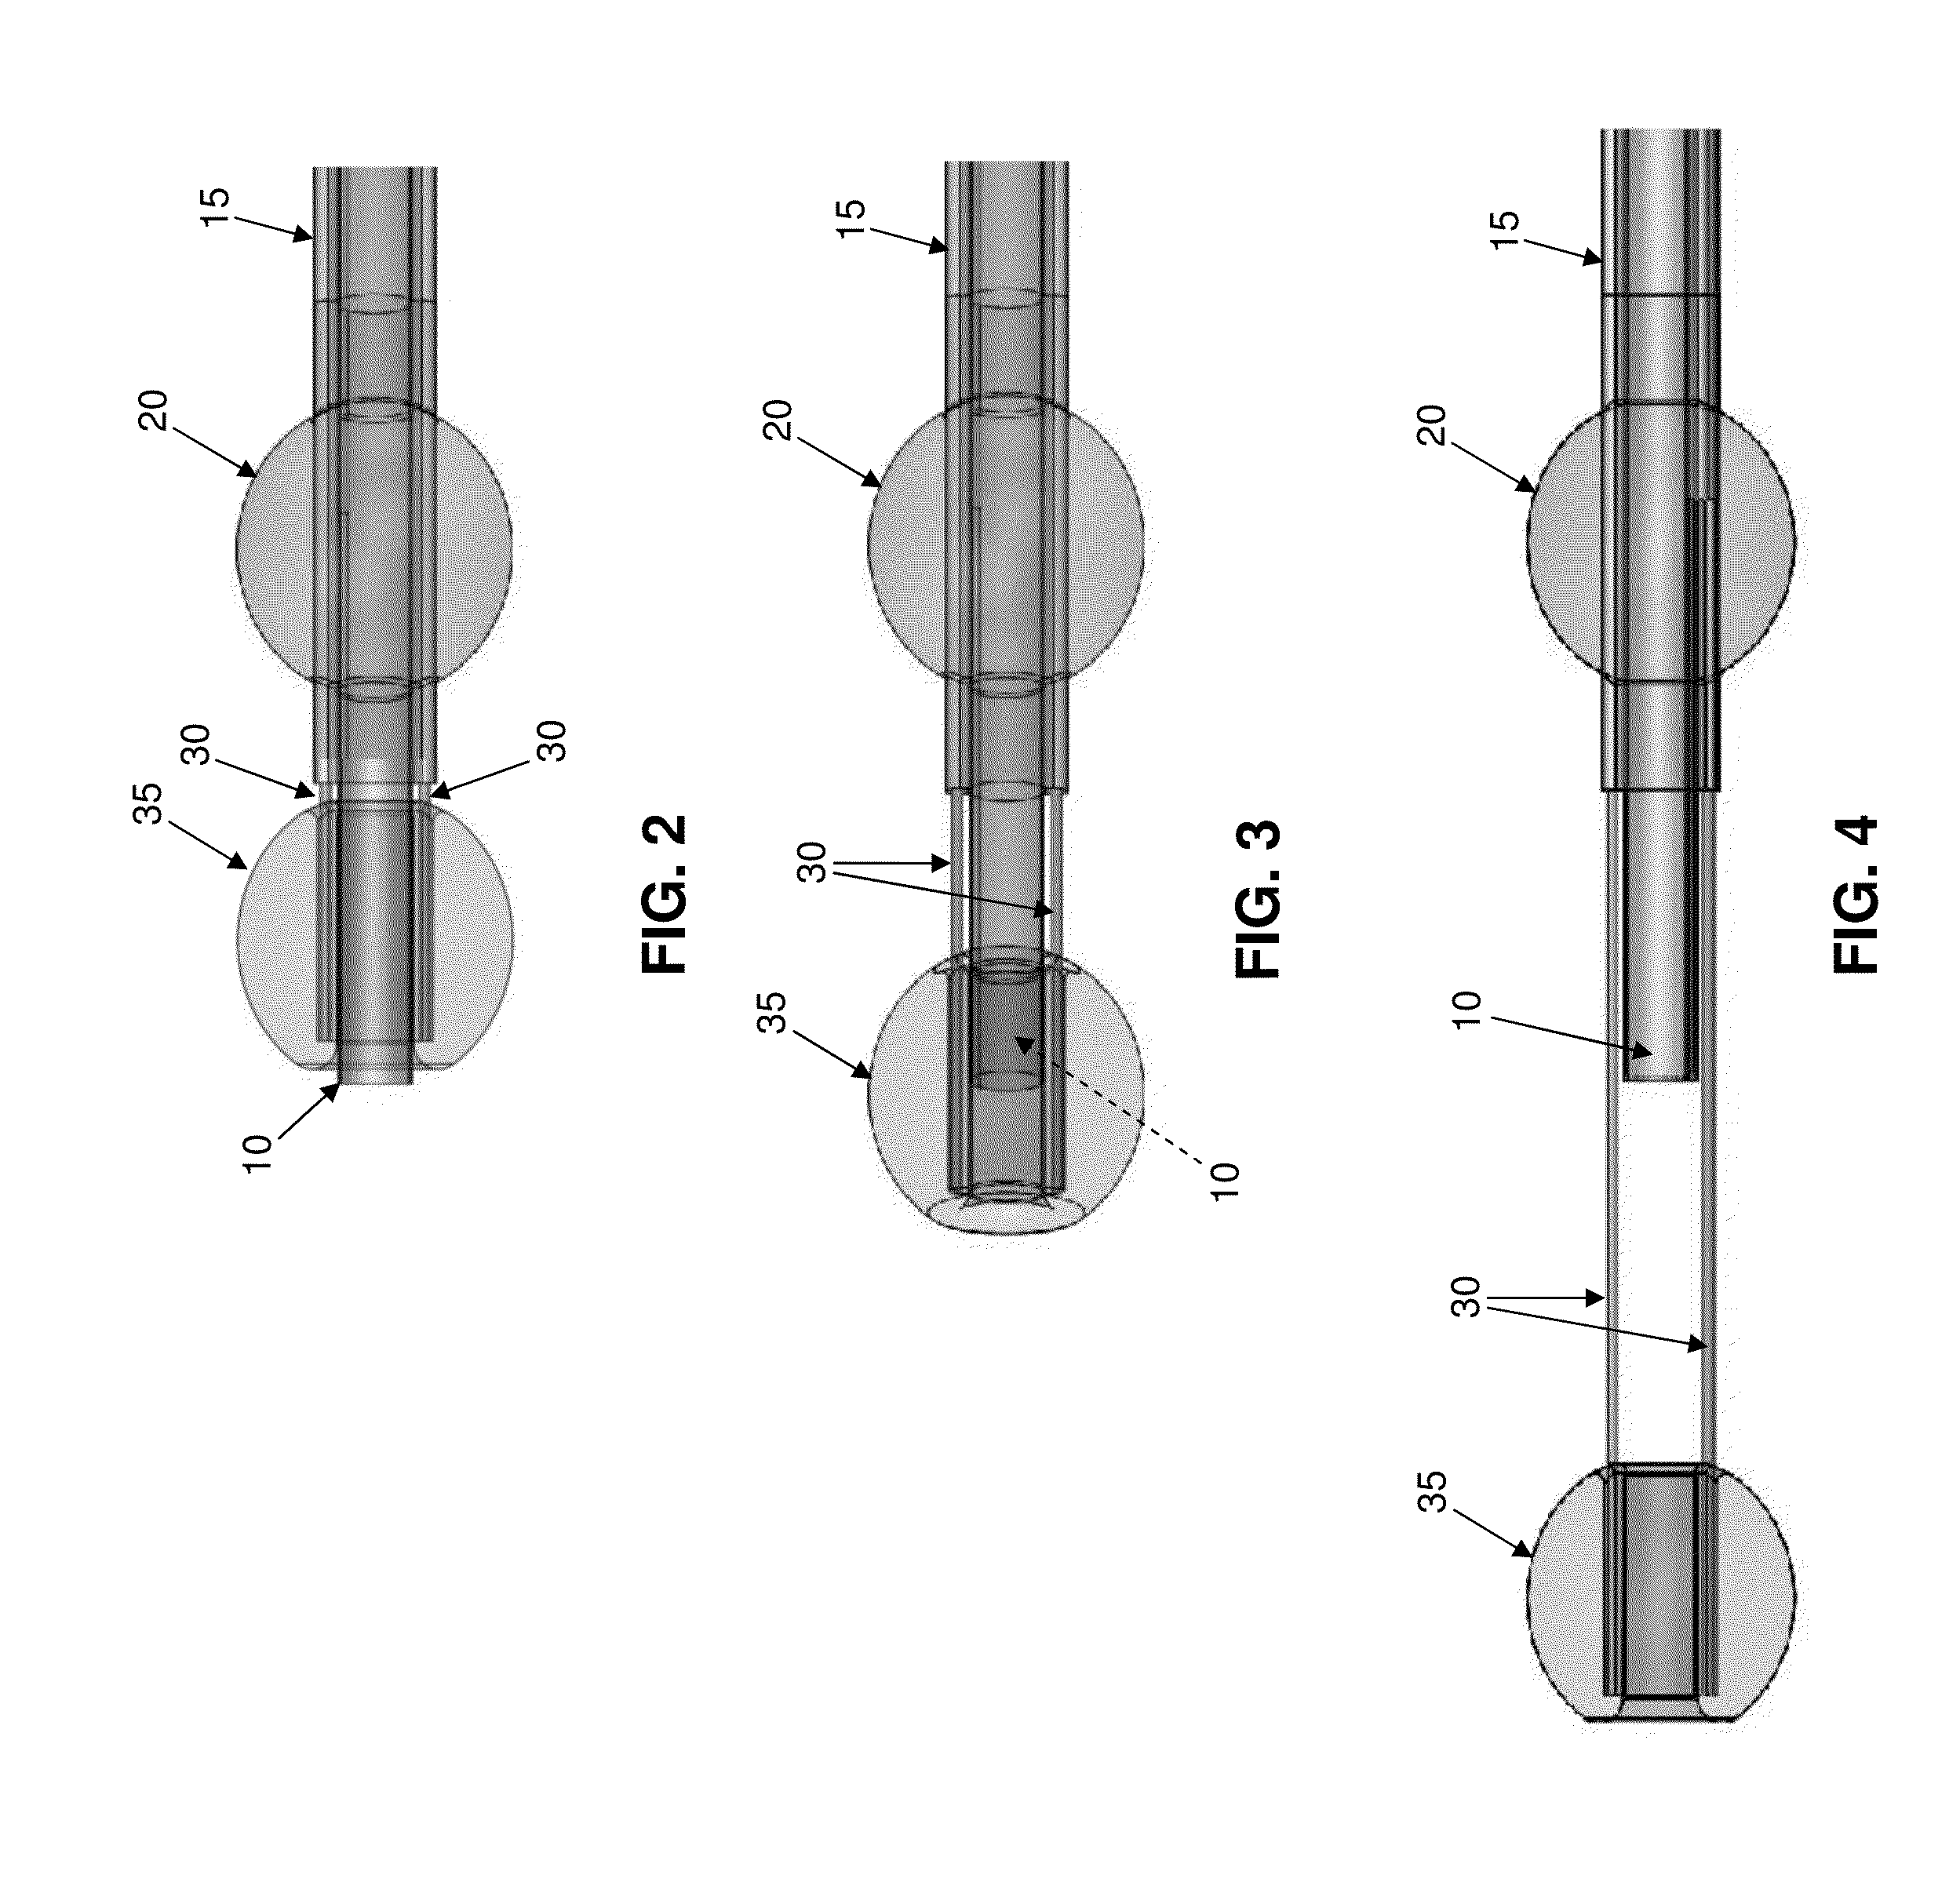 Method and apparatus for manipulating the side wall of a body lumen or body cavity so as to provide increased visualization of the same and/or increased access to the same, and/or for stabilizing instruments relative to the same